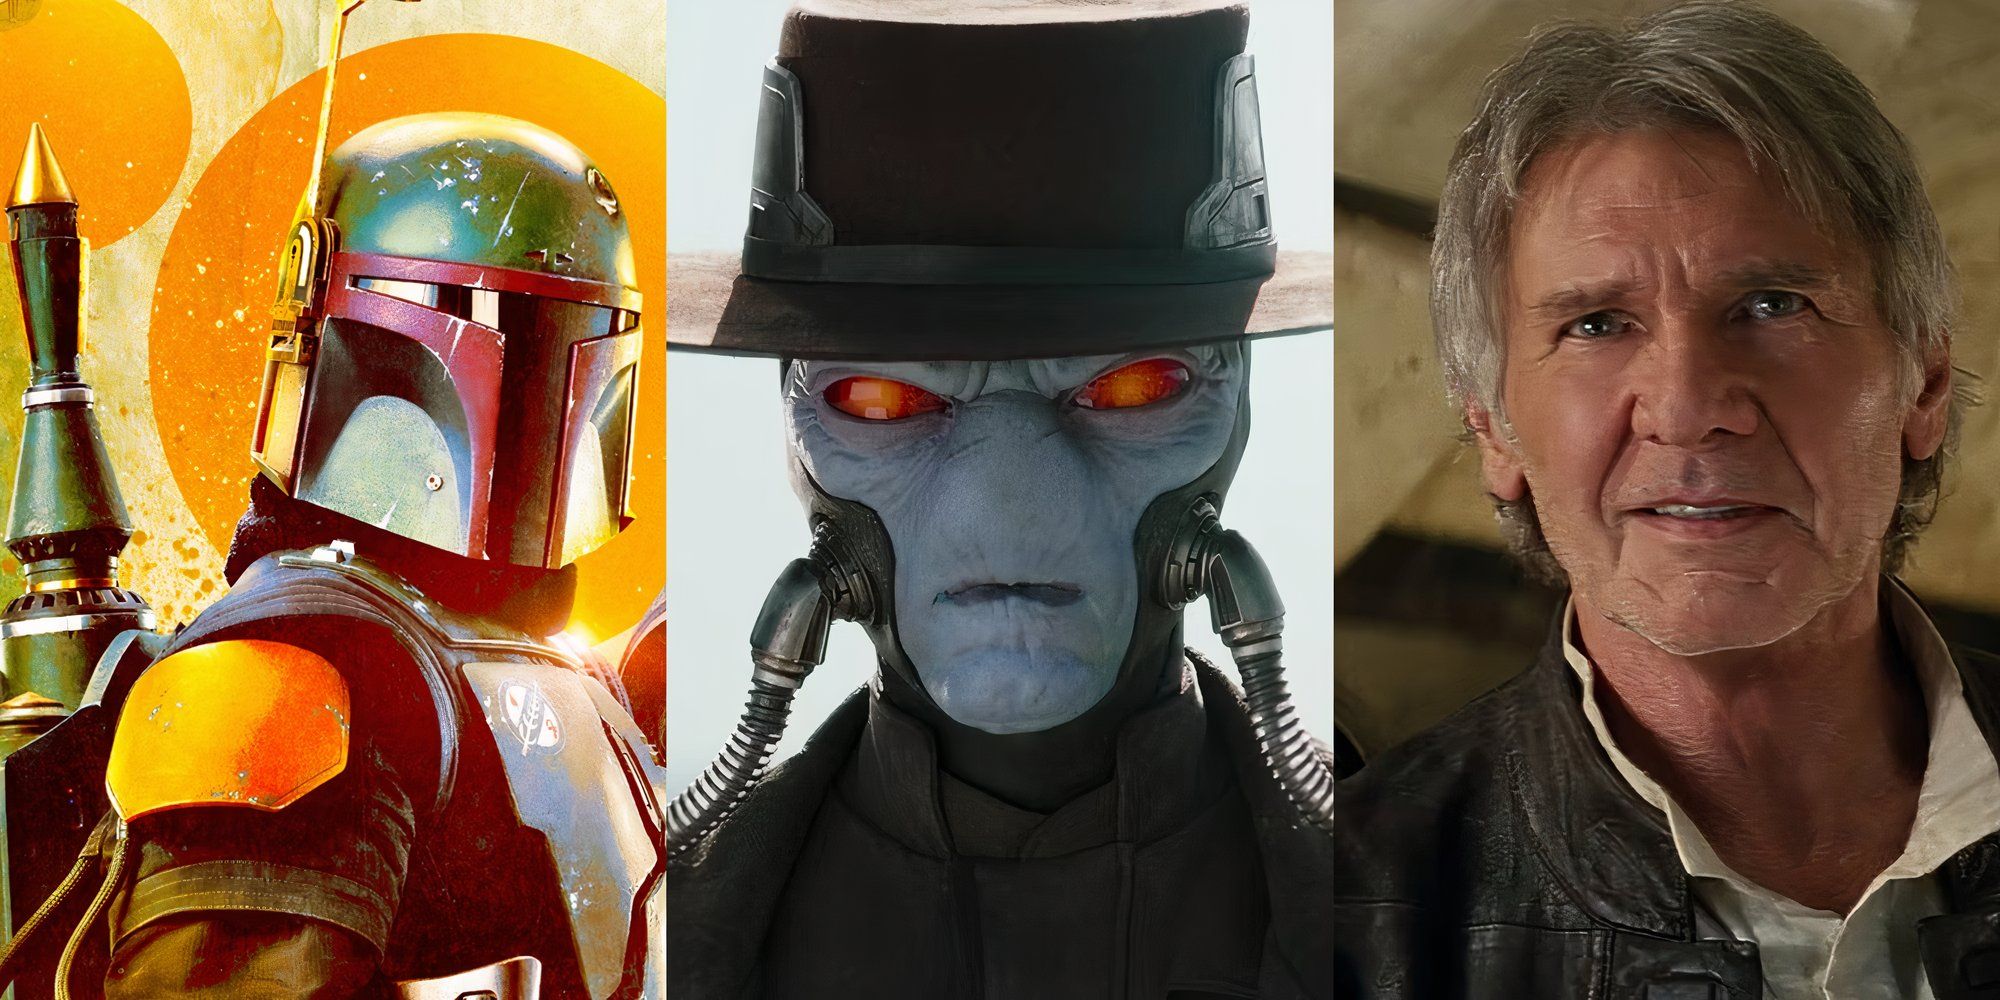 Boba Fett, Cad Bane and old Han Solo feature image for best Star Wars outlaws